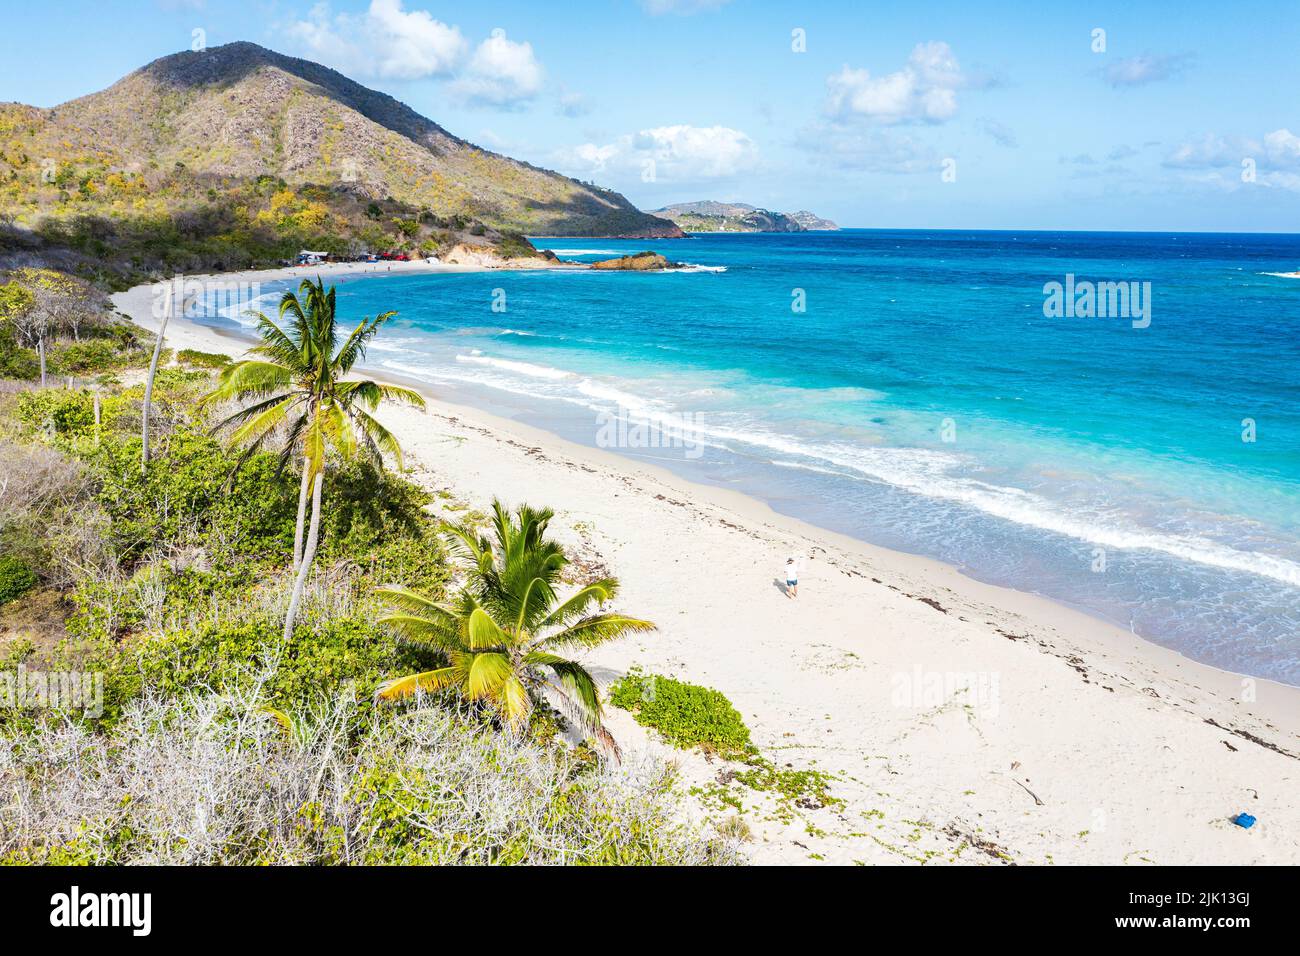 One tourist walking on empty palm fringed beach, overhead view, Rendezvous Beach, Antigua, West Indies, Caribbean, Central America Stock Photo